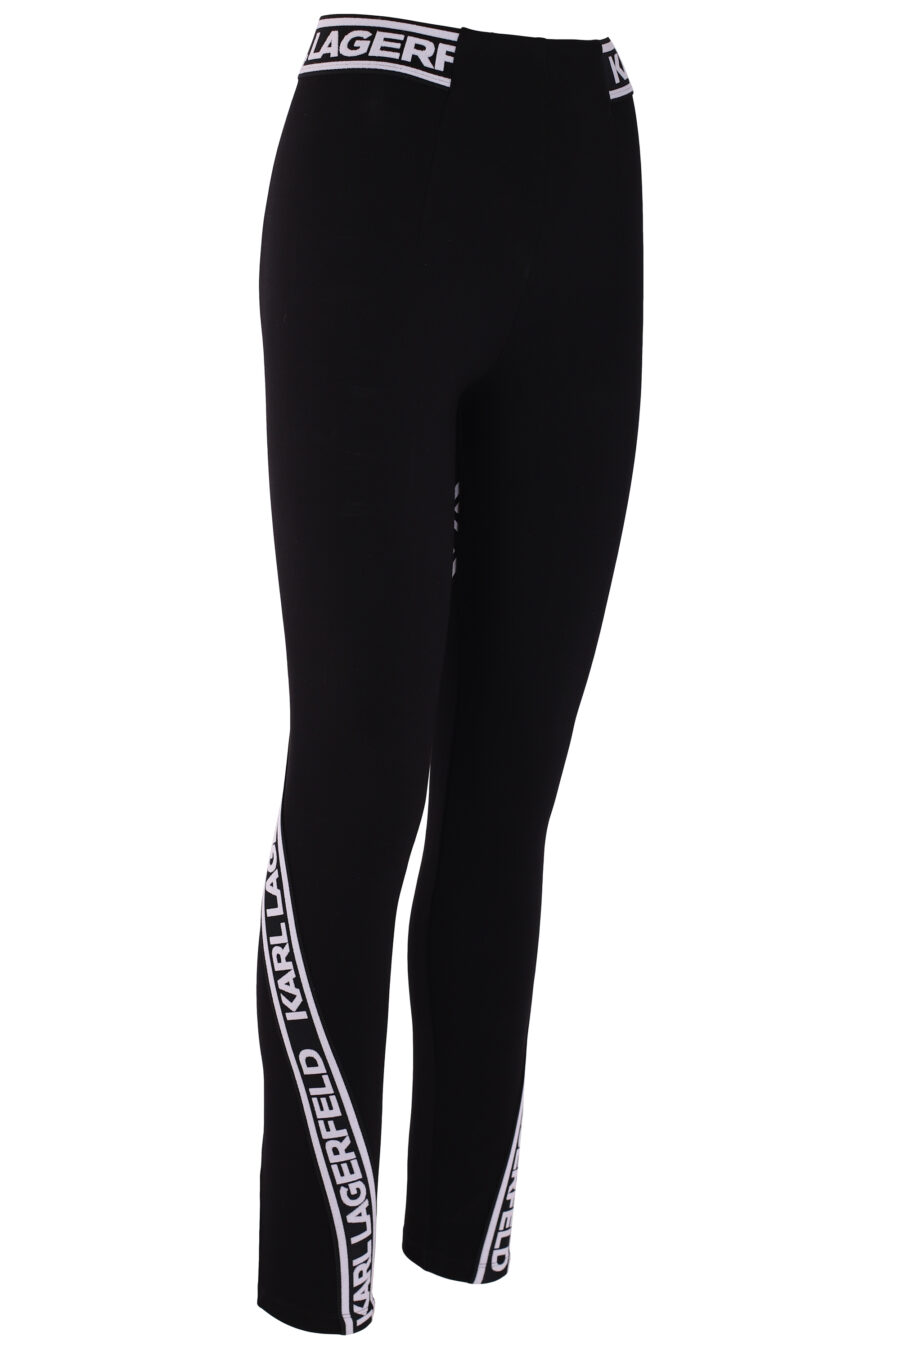 Black leggings with logo tape on the sides - IMG 3718